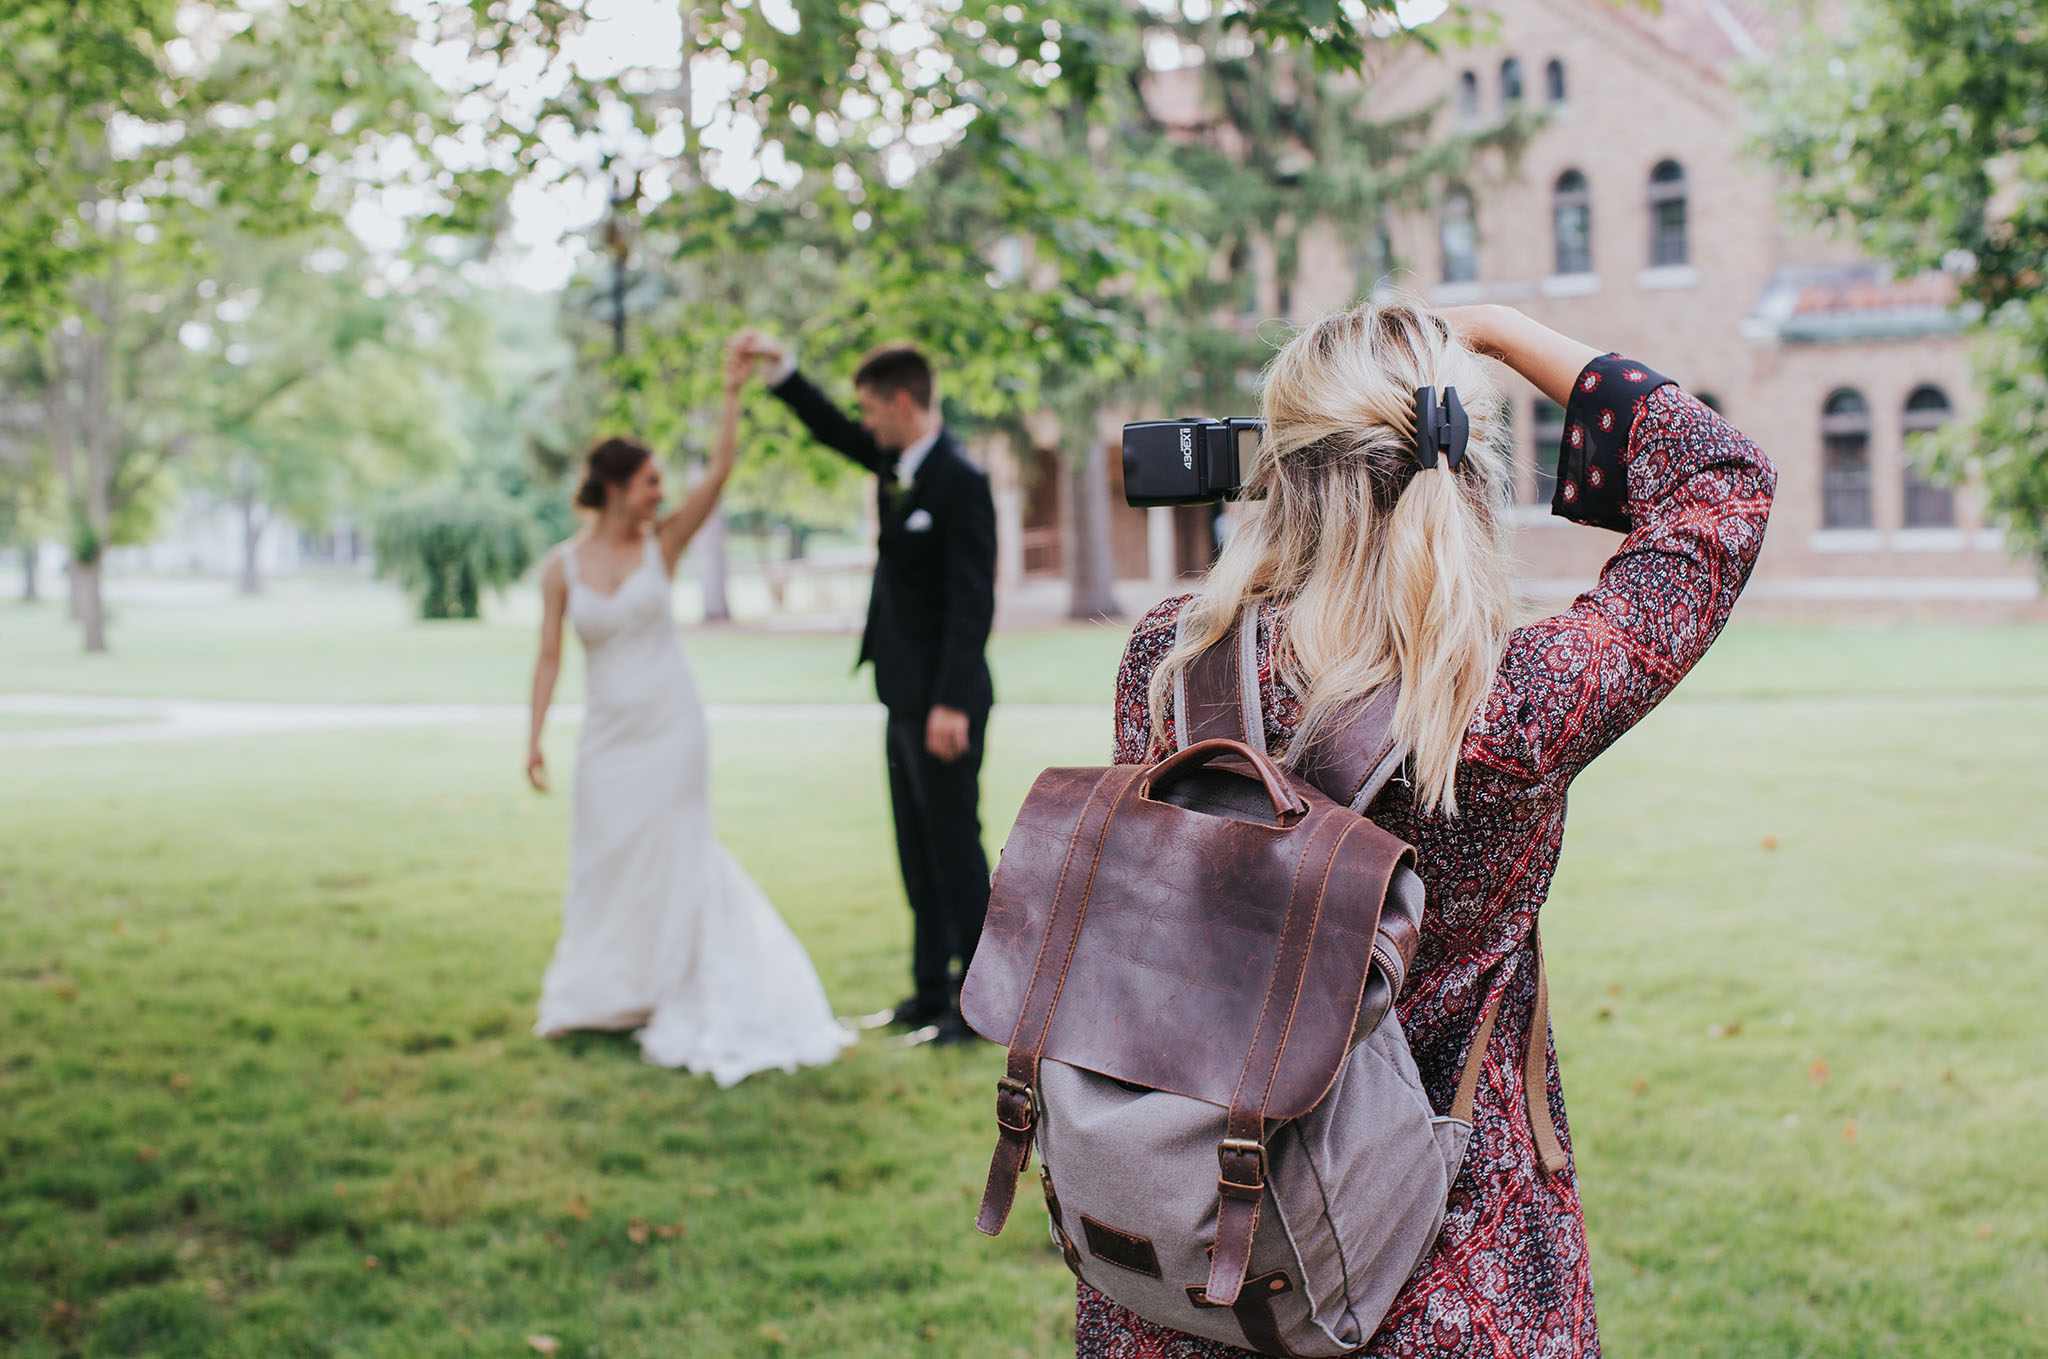 Portrait, weddings and events are still a popular way to make money with photography.